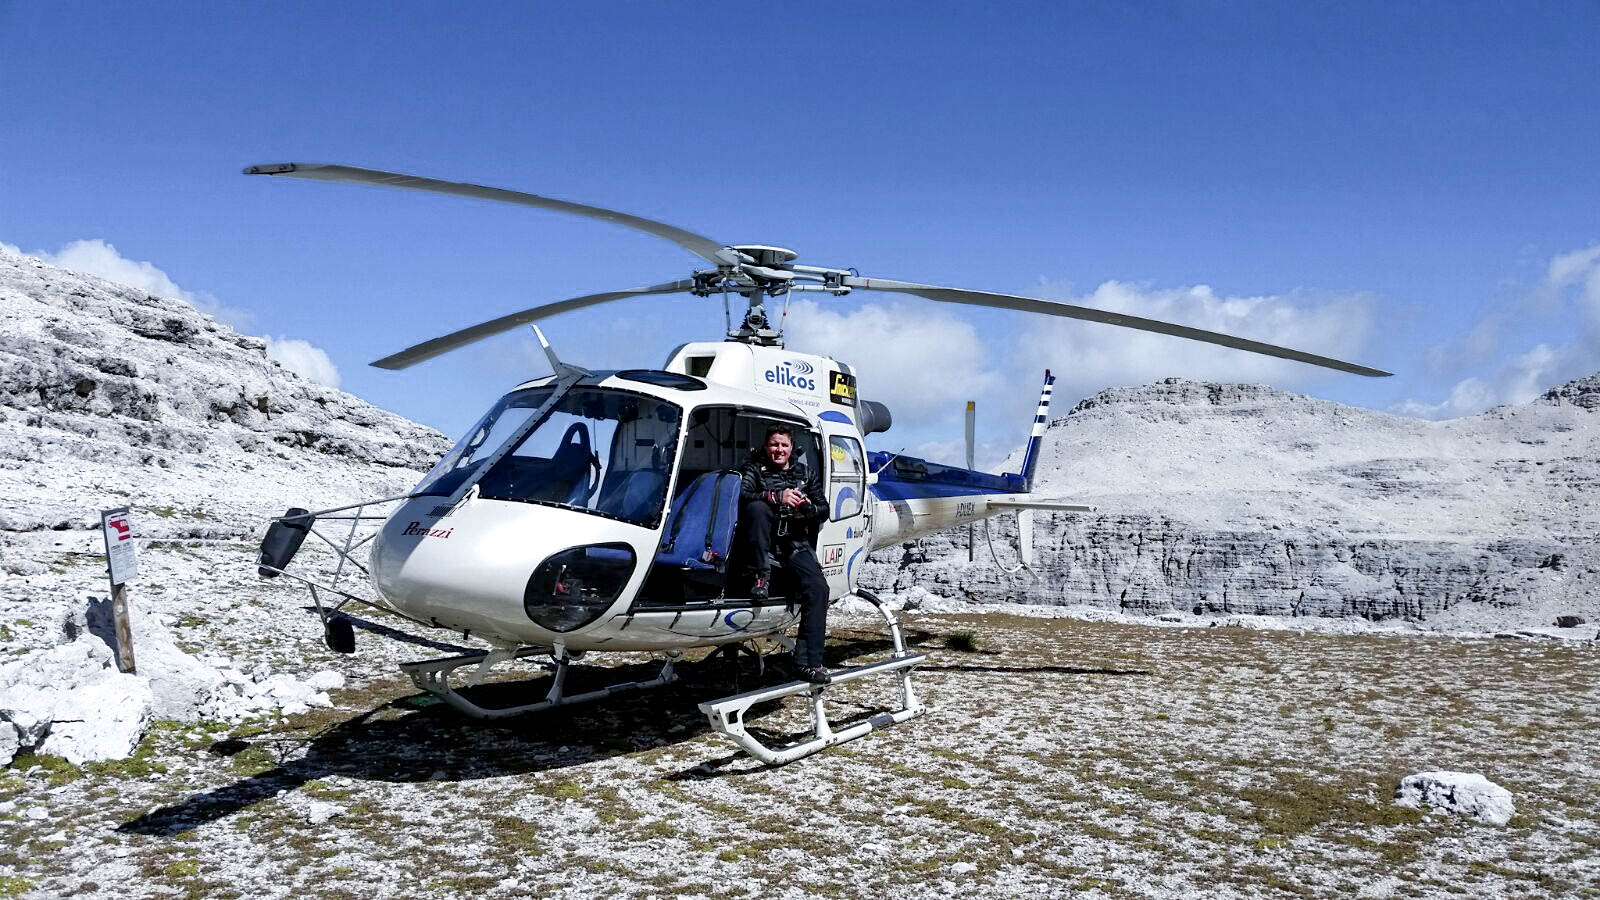 Clear Angle Studios crewmember sitting in the door of a helicopter in front of snowy mountains in Italy, before beginning an aerical enviroment 3d scan capture.